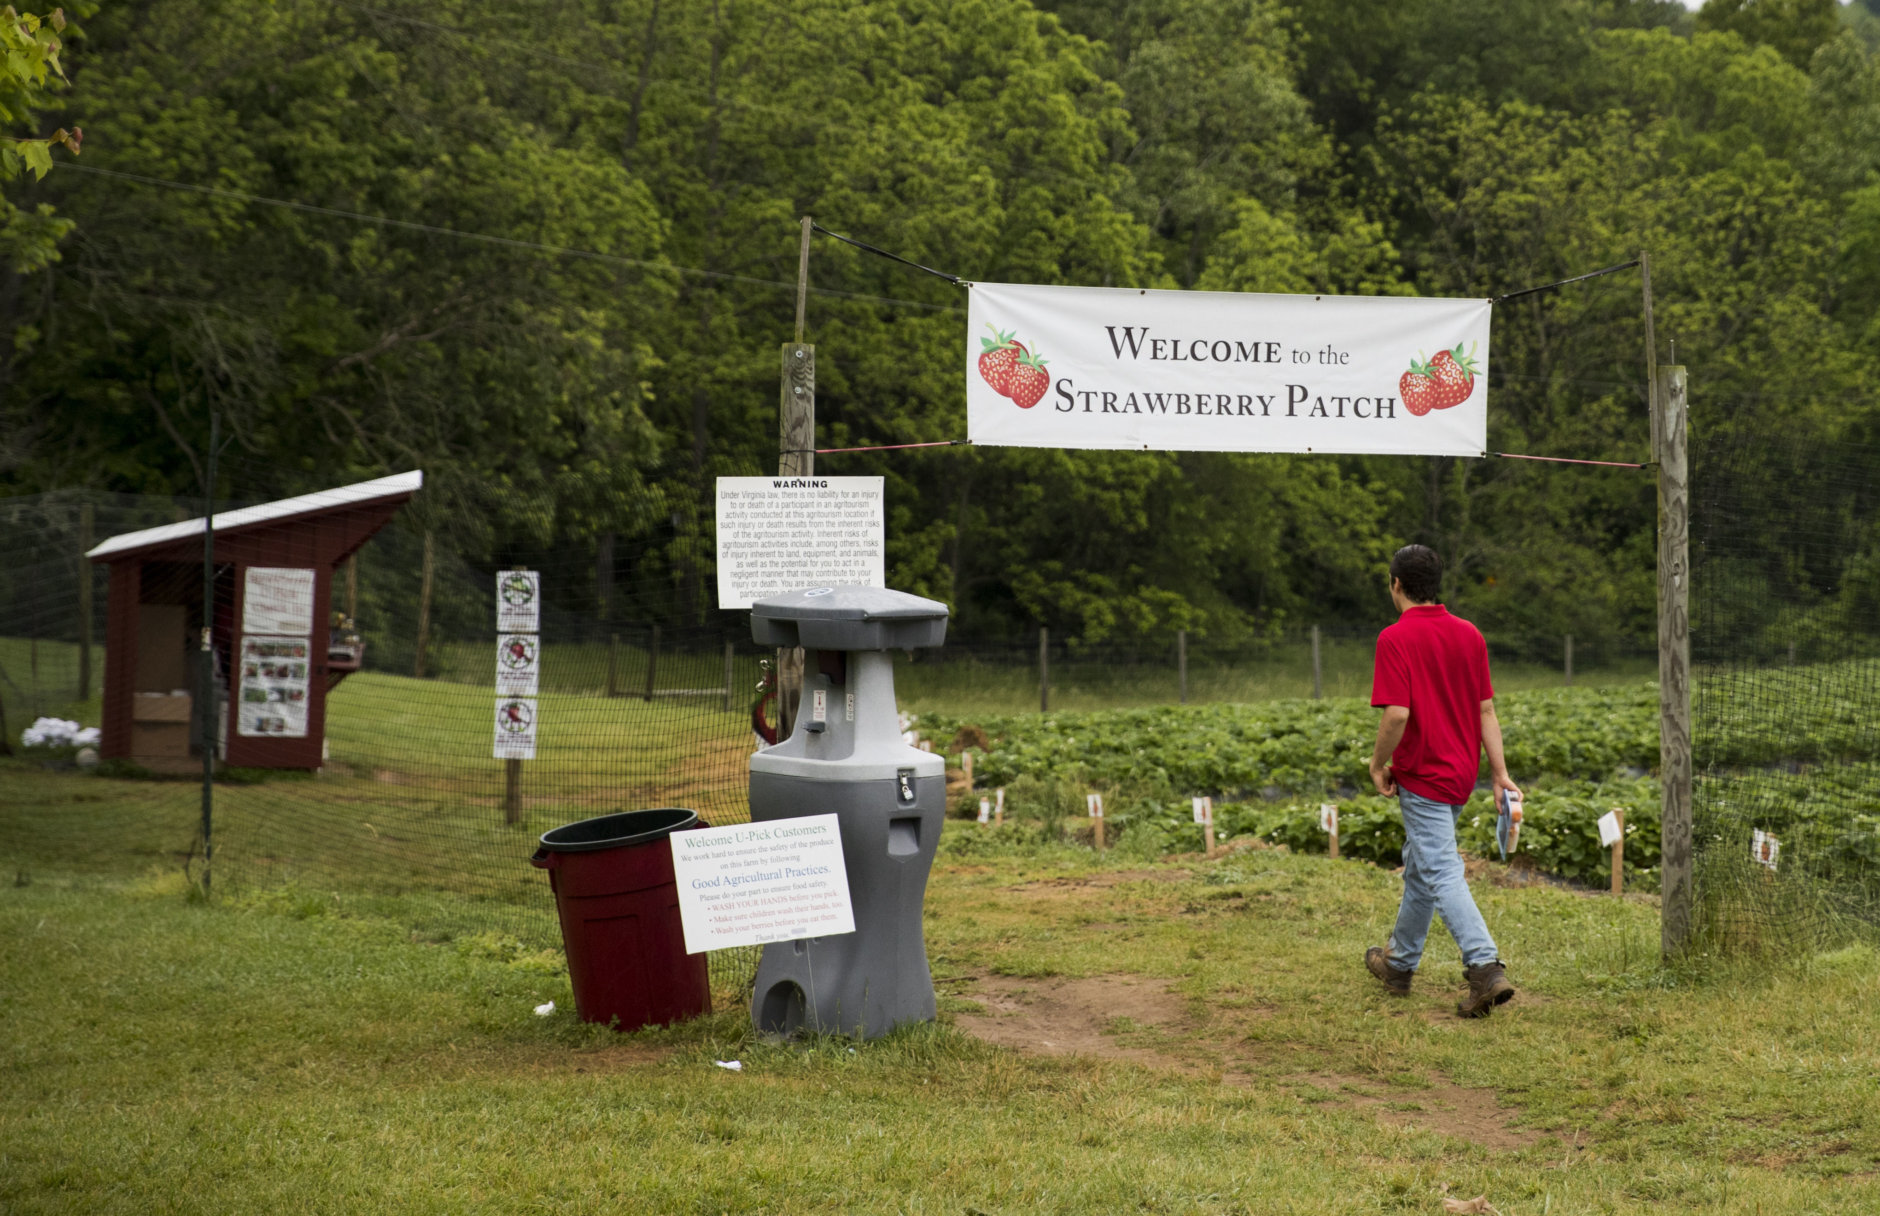 In this Tuesday, May 23, 2017, photo, Ben Testa, 19, a student at Northern Virginia Community College, arrives for his summer job at Wegmeyer Farms in Hamilton, Va. Summer jobs are vanishing as U.S. teens spend more time in school and face competition from older workers. (AP Photo/Carolyn Kaster)